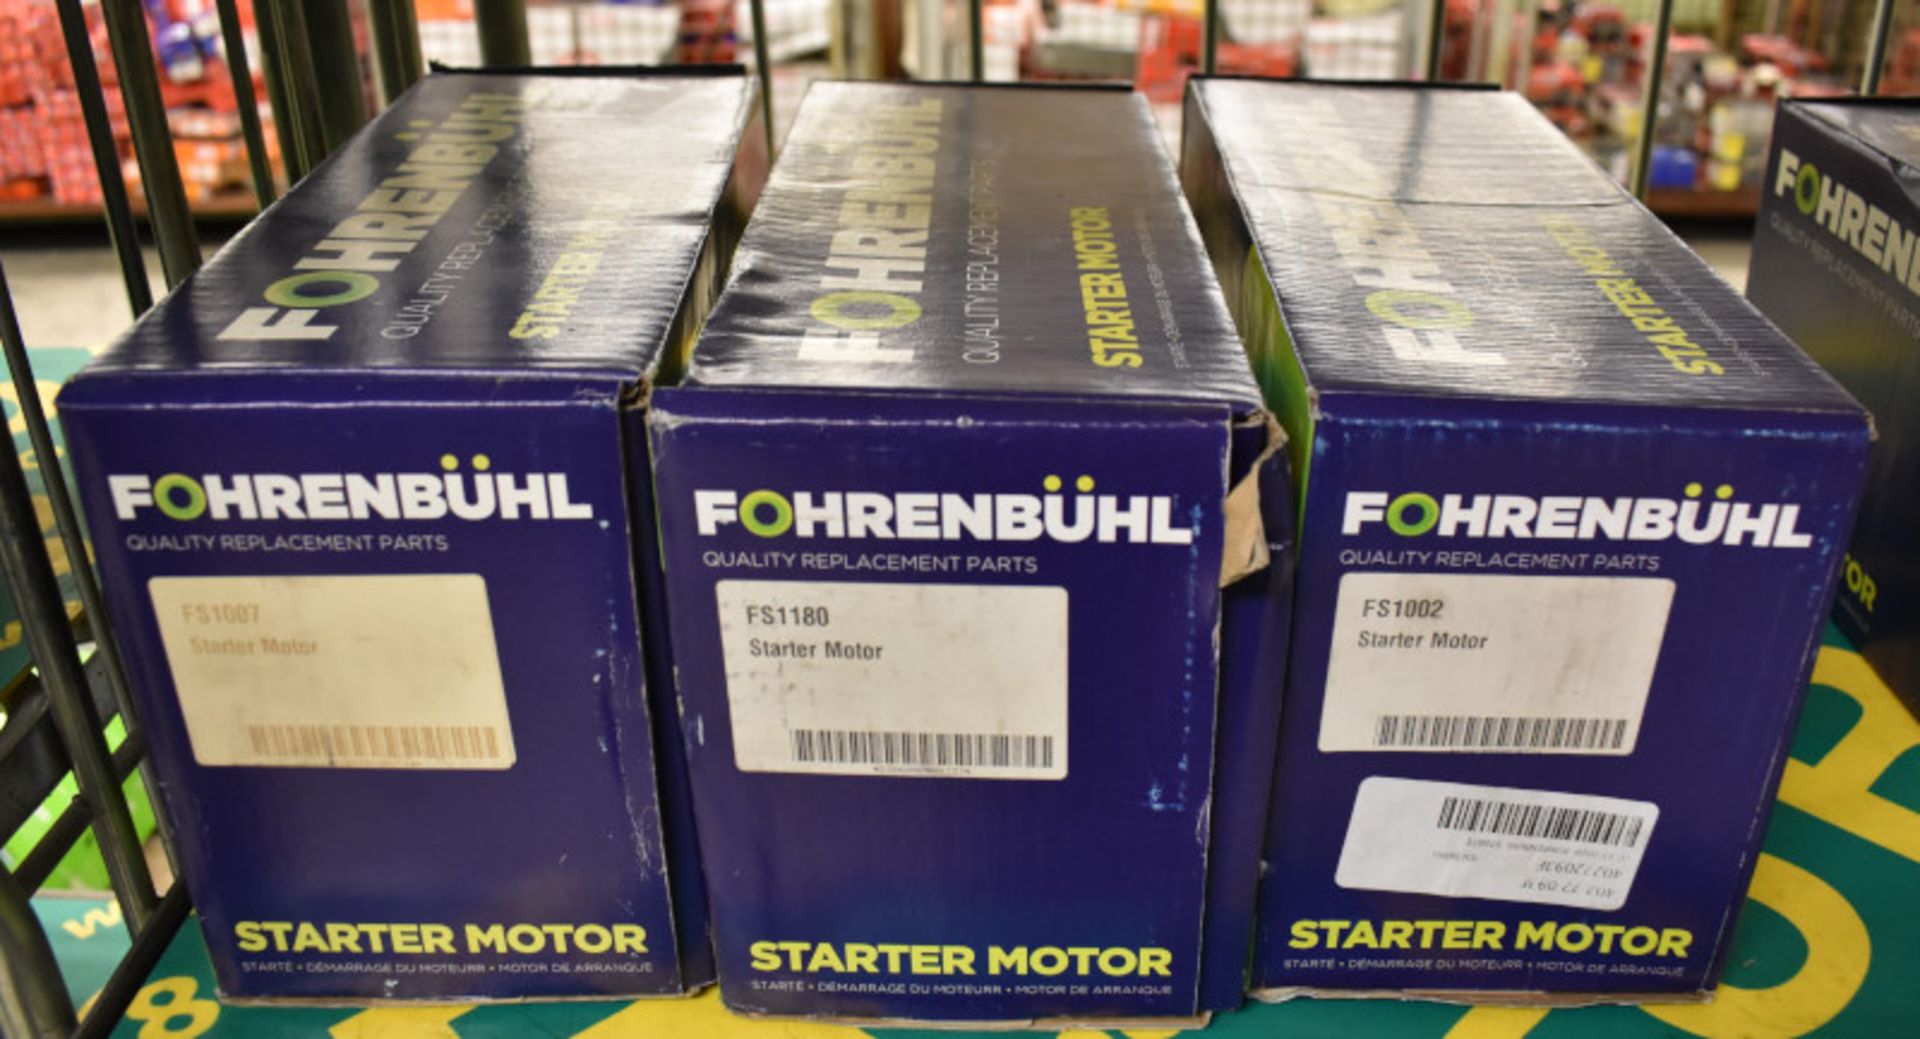 3x Fohrenbuhl Starter Motors - please see pictures for examples of make and model numbers